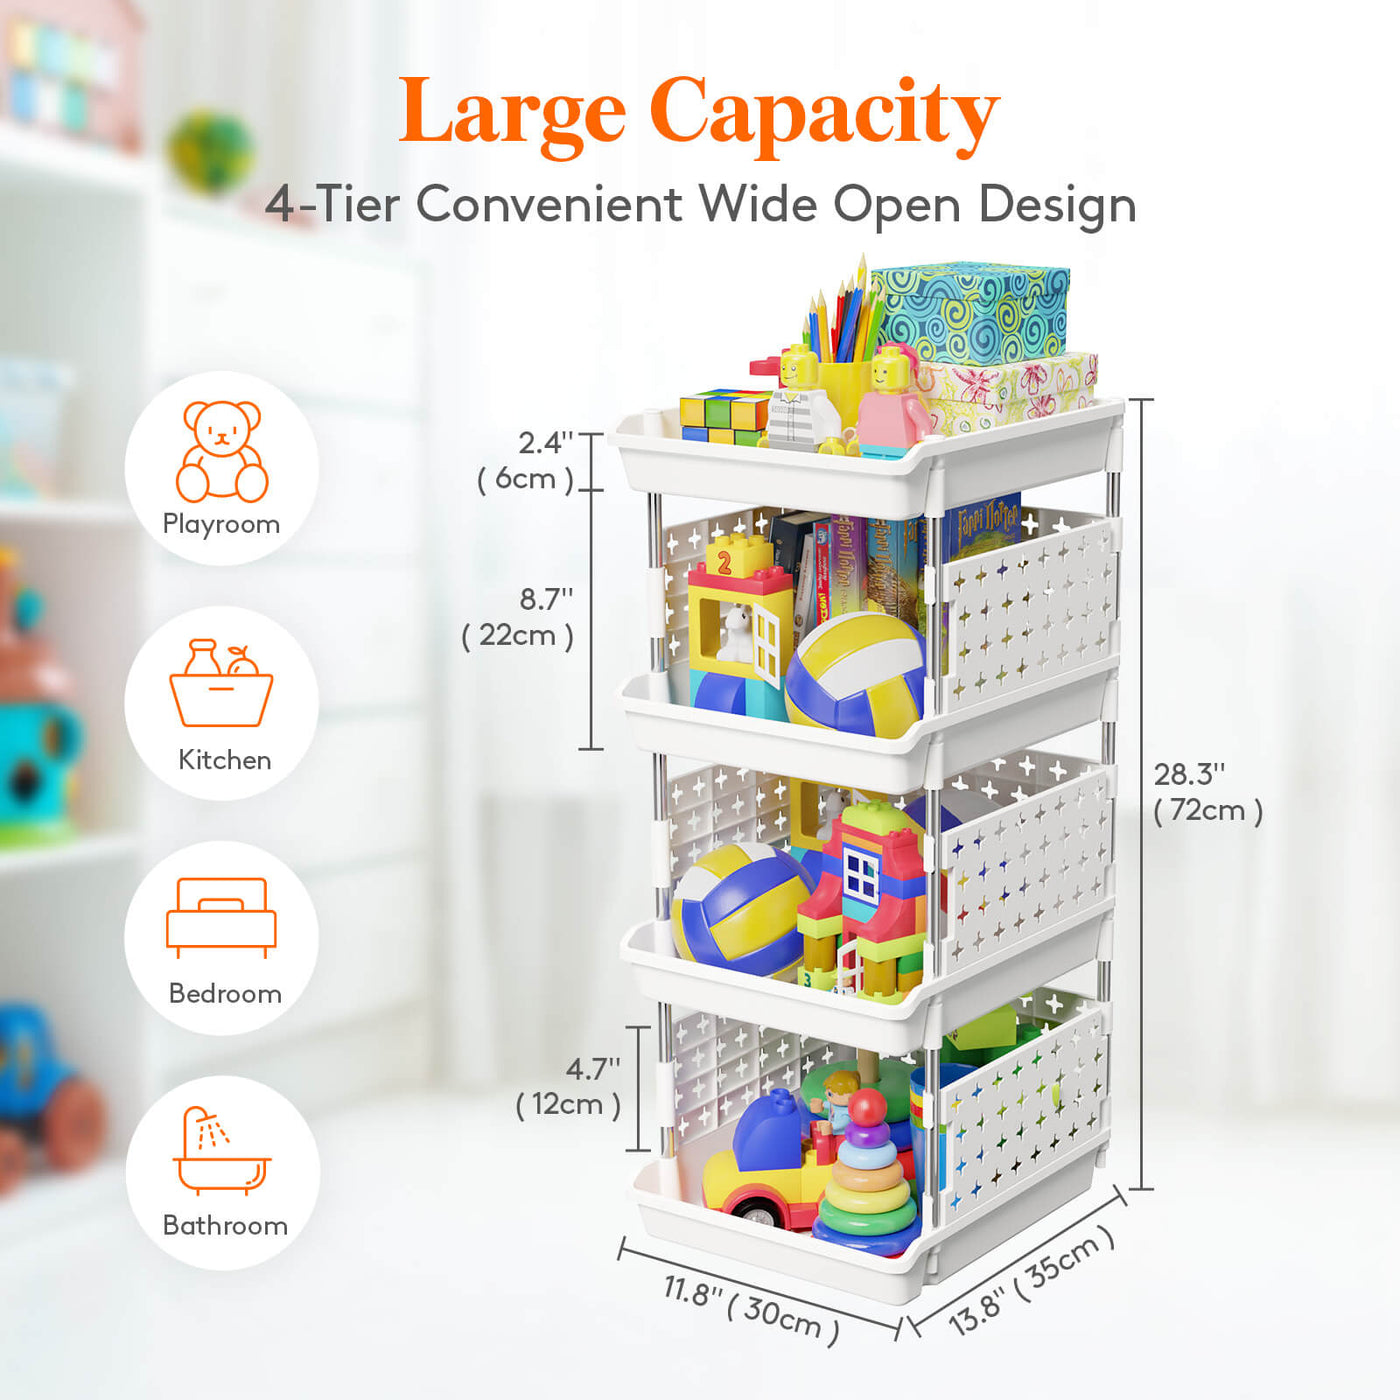 Where to Find Cheap Storage Bins and Baskets